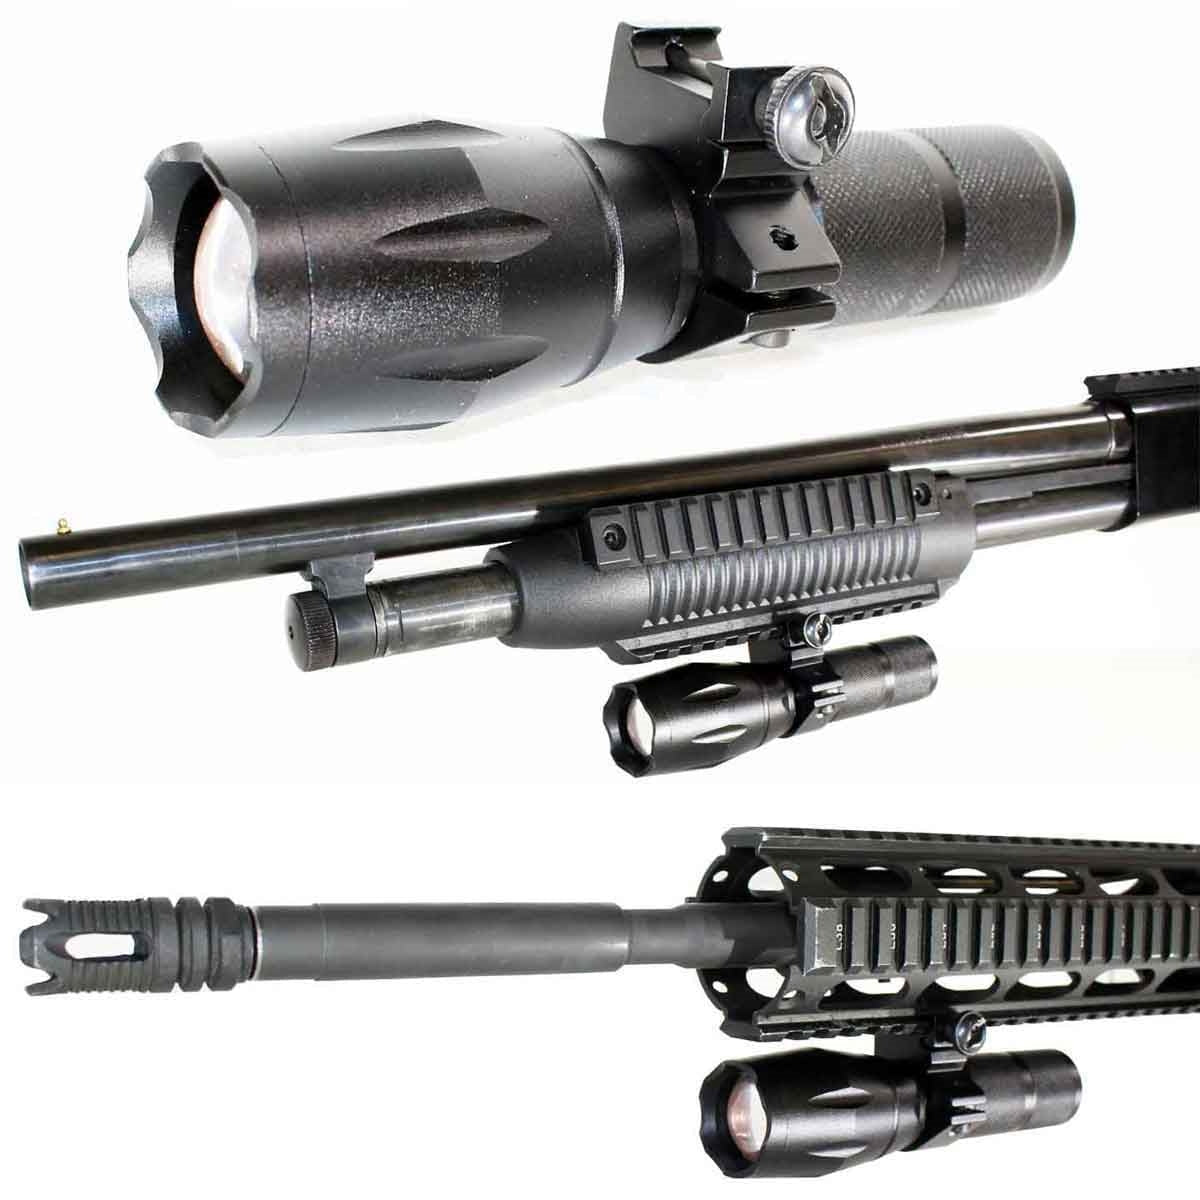 Tactical 1200 Lumen Rechargeable Picatinny Mounted Flashlight Compatible With Kel-Tec KSG 12 Gauge Pump.